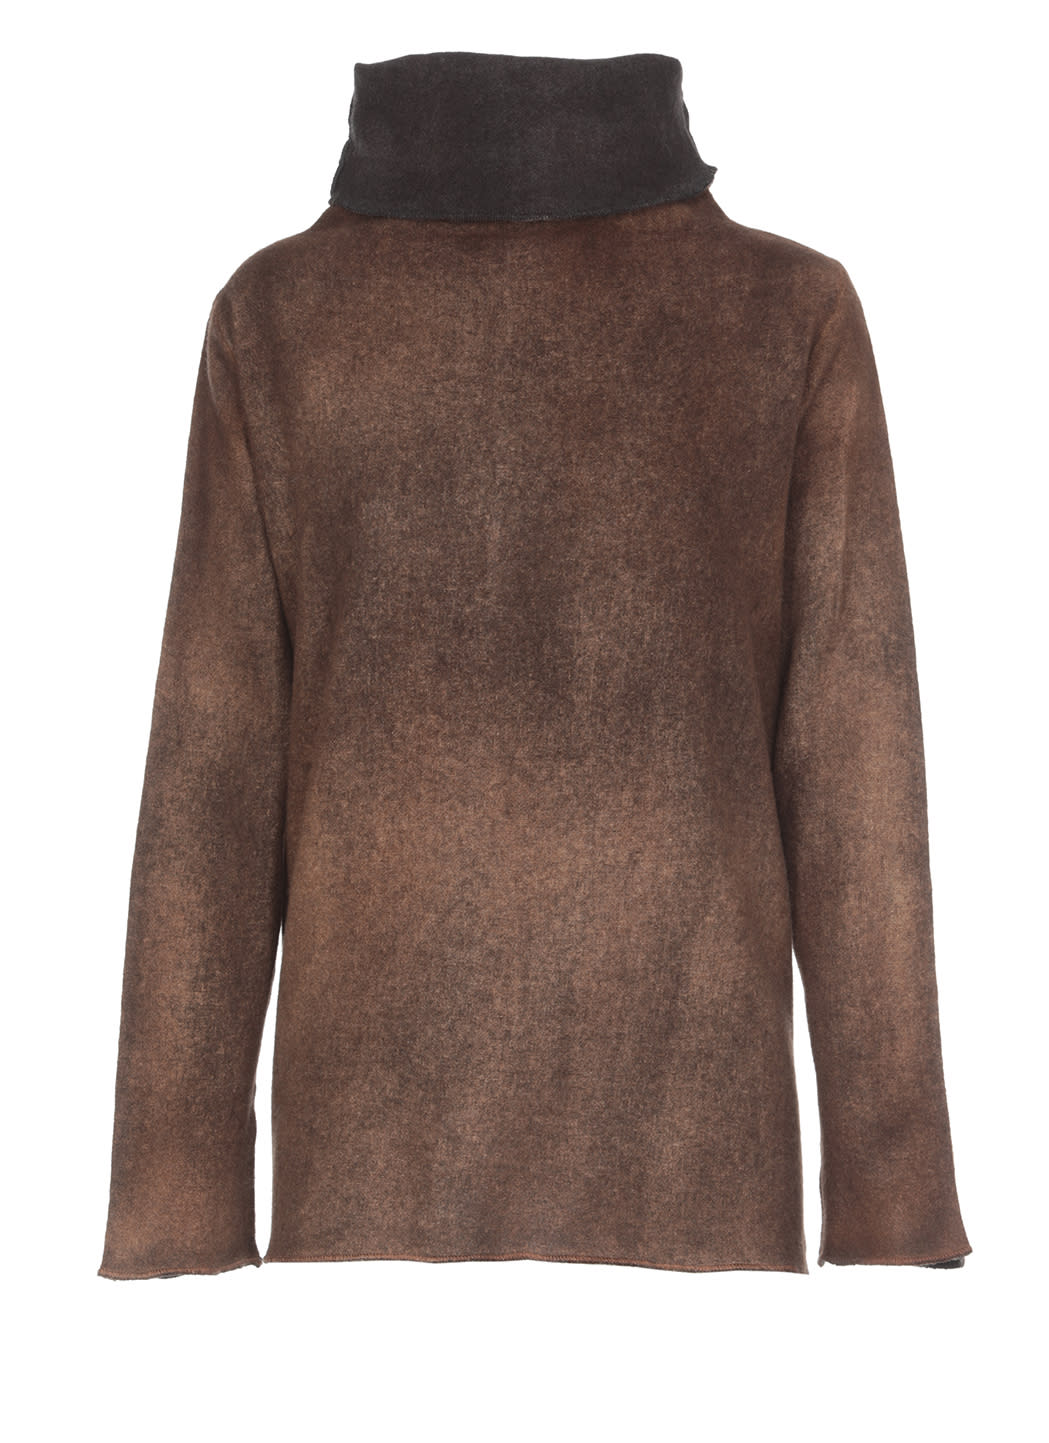 Avant Toi Cashmere And Virgin Wool Sweater